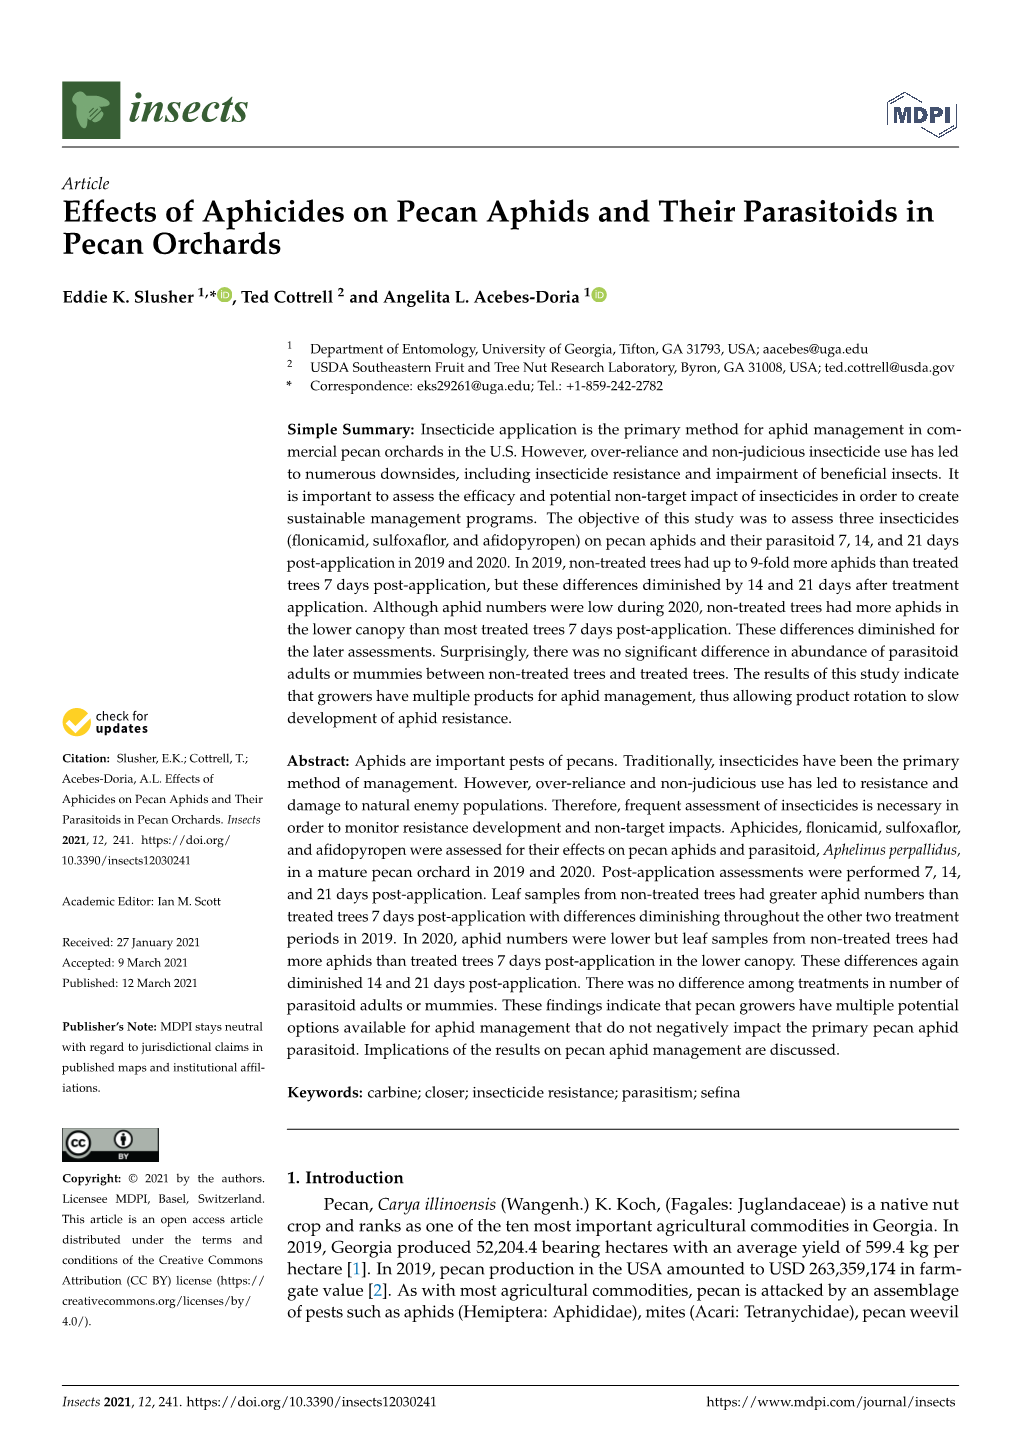 Effects of Aphicides on Pecan Aphids and Their Parasitoids in Pecan Orchards